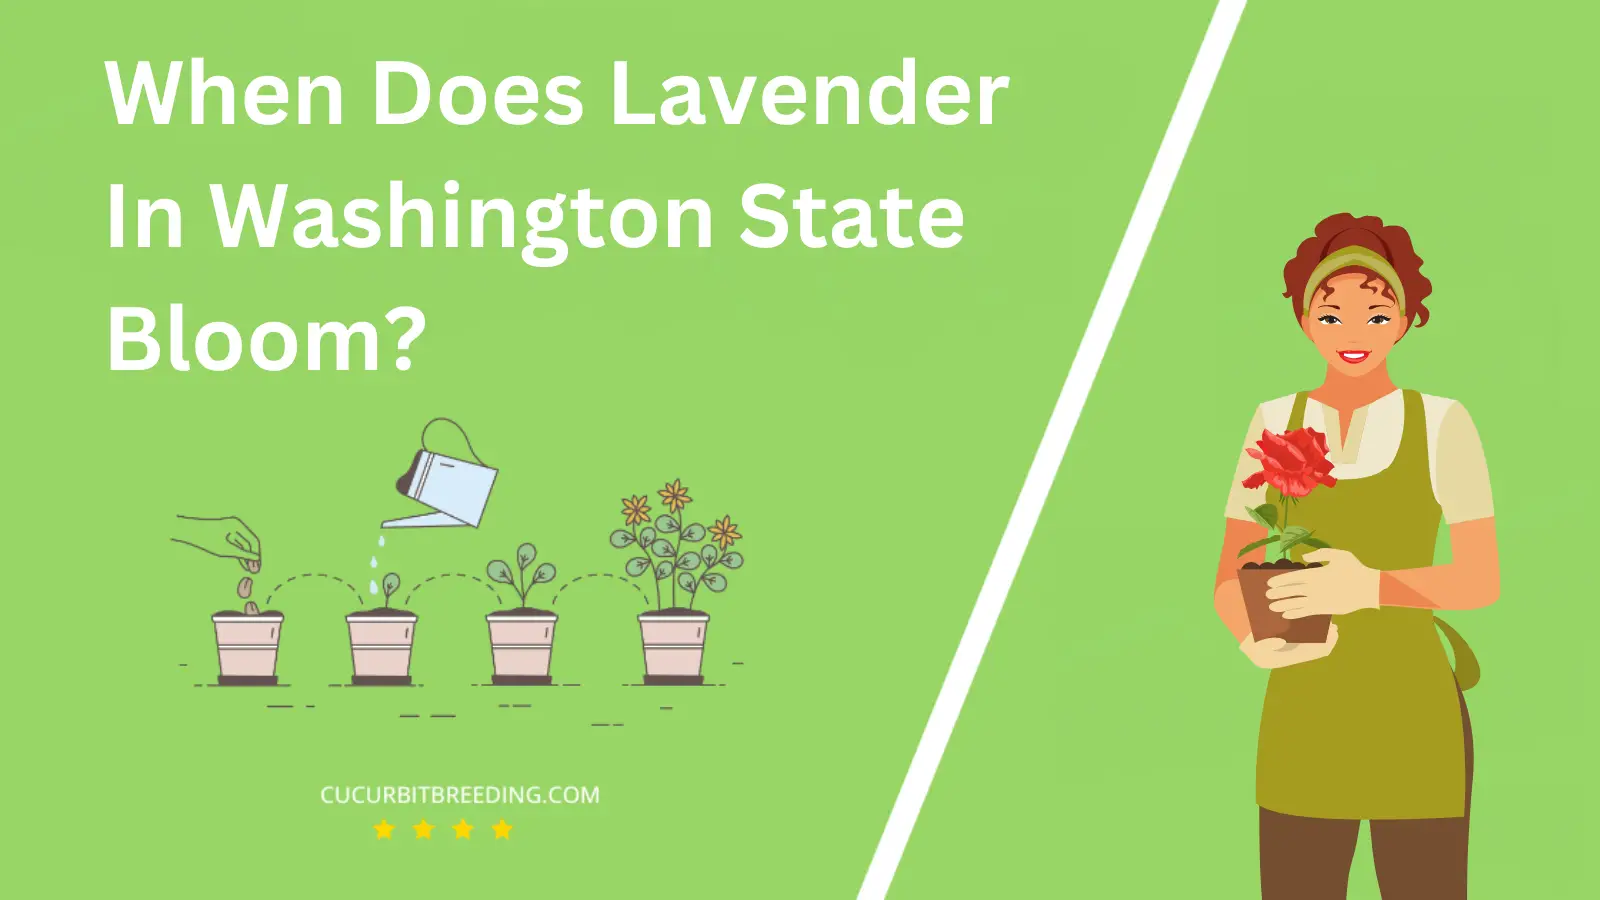 When Does Lavender In Washington State Bloom?